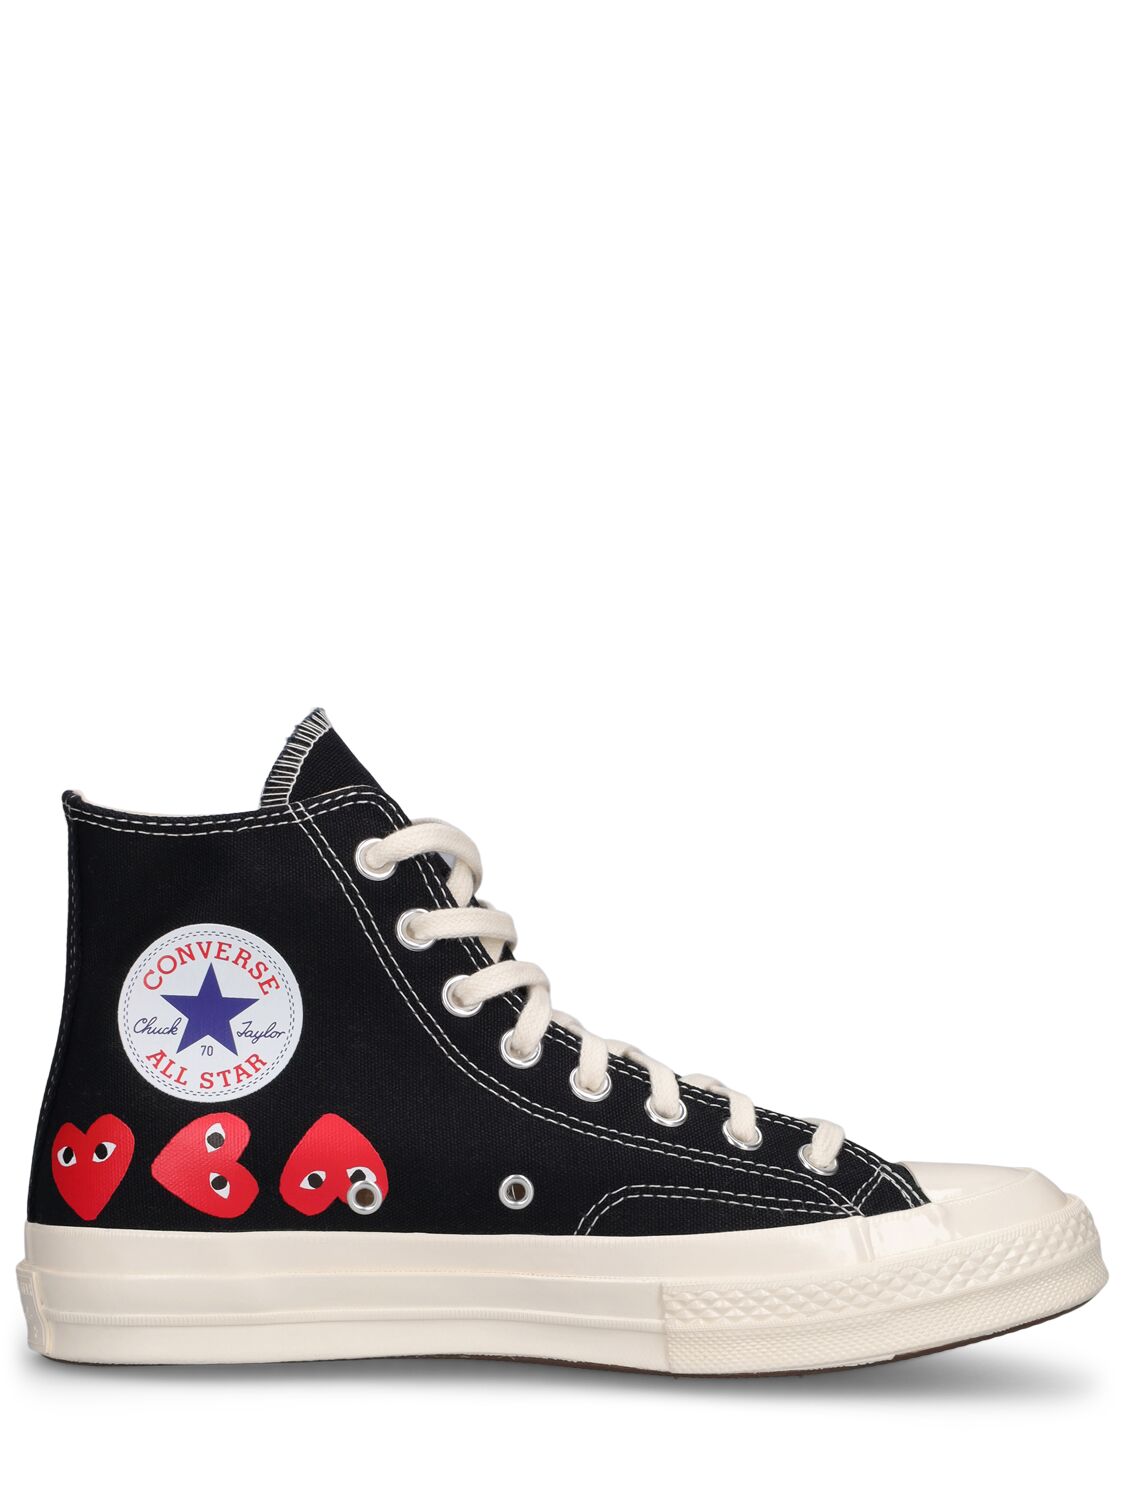 Comme Des Garçons Play Converse Canvas High Top Sneakers In Black